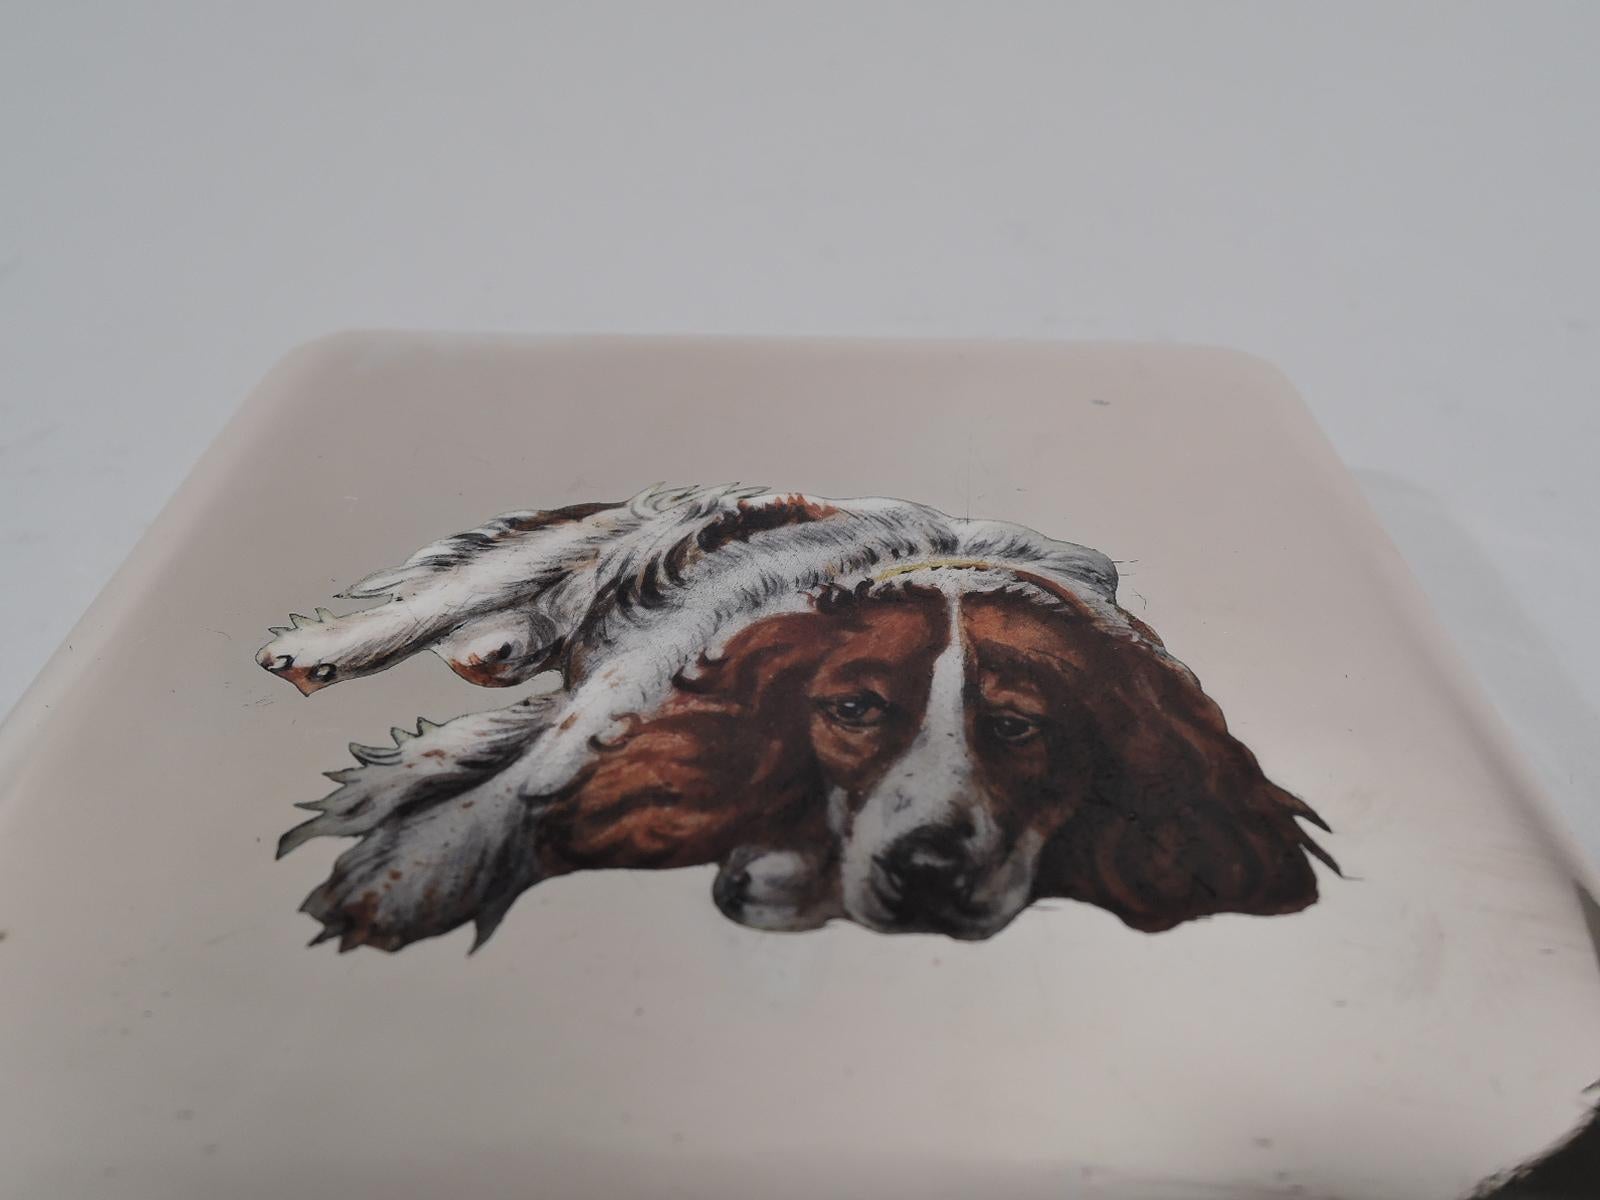 Austrian silver case, ca 1920. Square with concave sides. Cover hinged with curved tab and enameled dog: A floppy-eared spaniel with melancholy eyes. Interior gilt. Marked “800” and “Sterling”.  